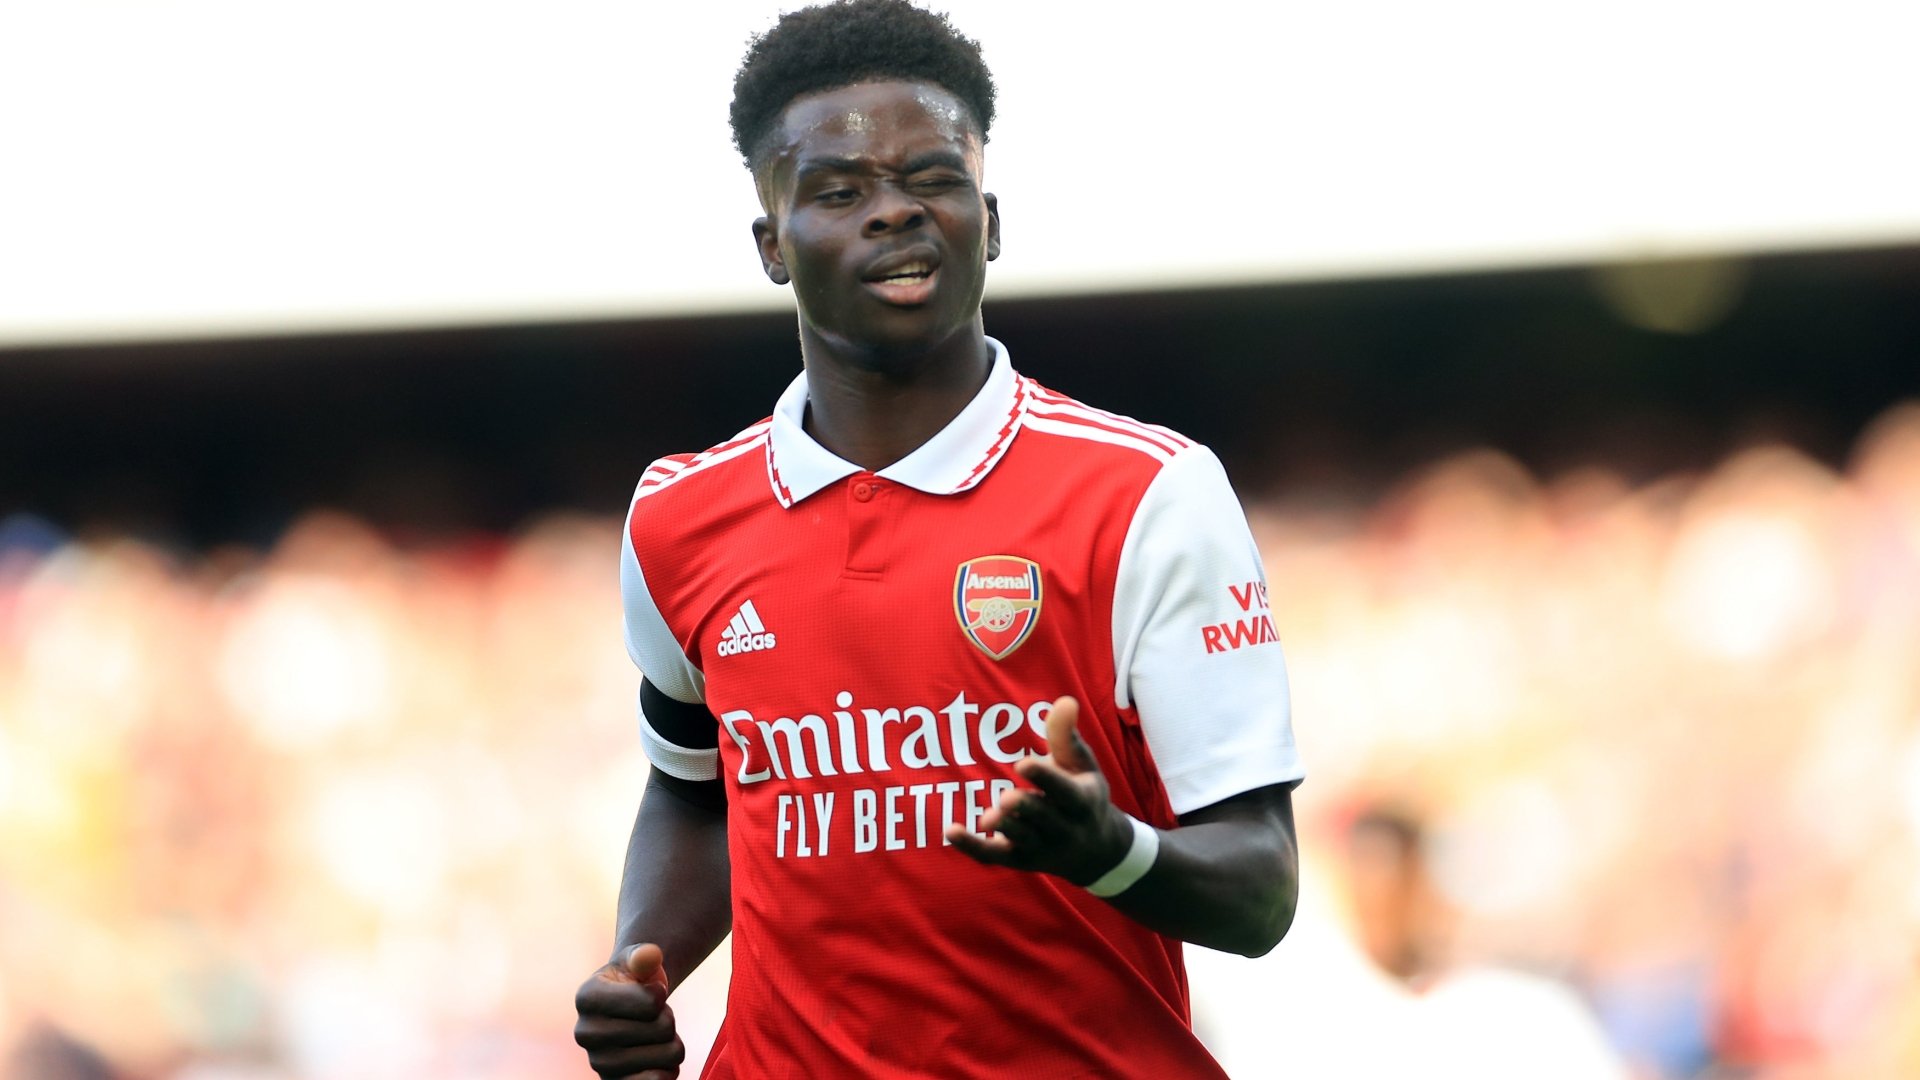 Bukayo Saka drops huge hint he WILL sign Arsenal deal despite £100m transfer interest from Man Utd, City and Liverpool